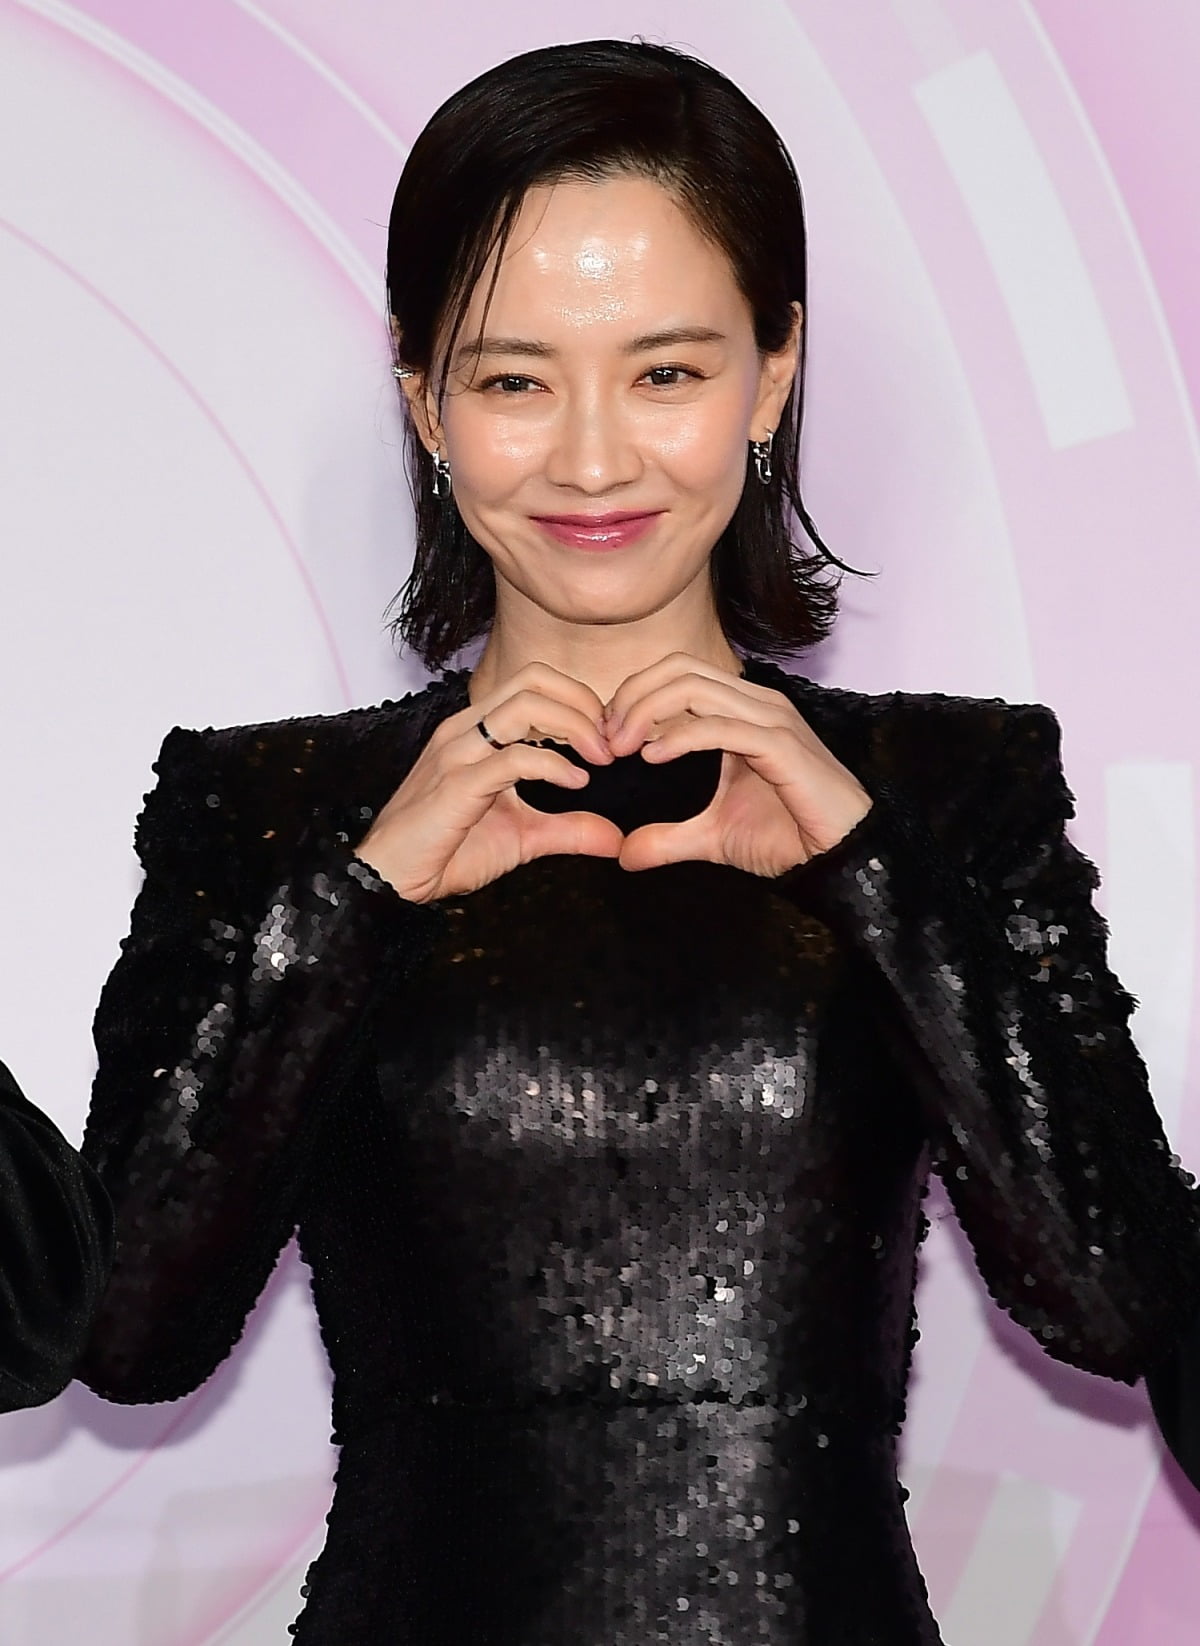 Park Yuna → Song Ji-hyo, a star who struggled with her agency's financial difficulties